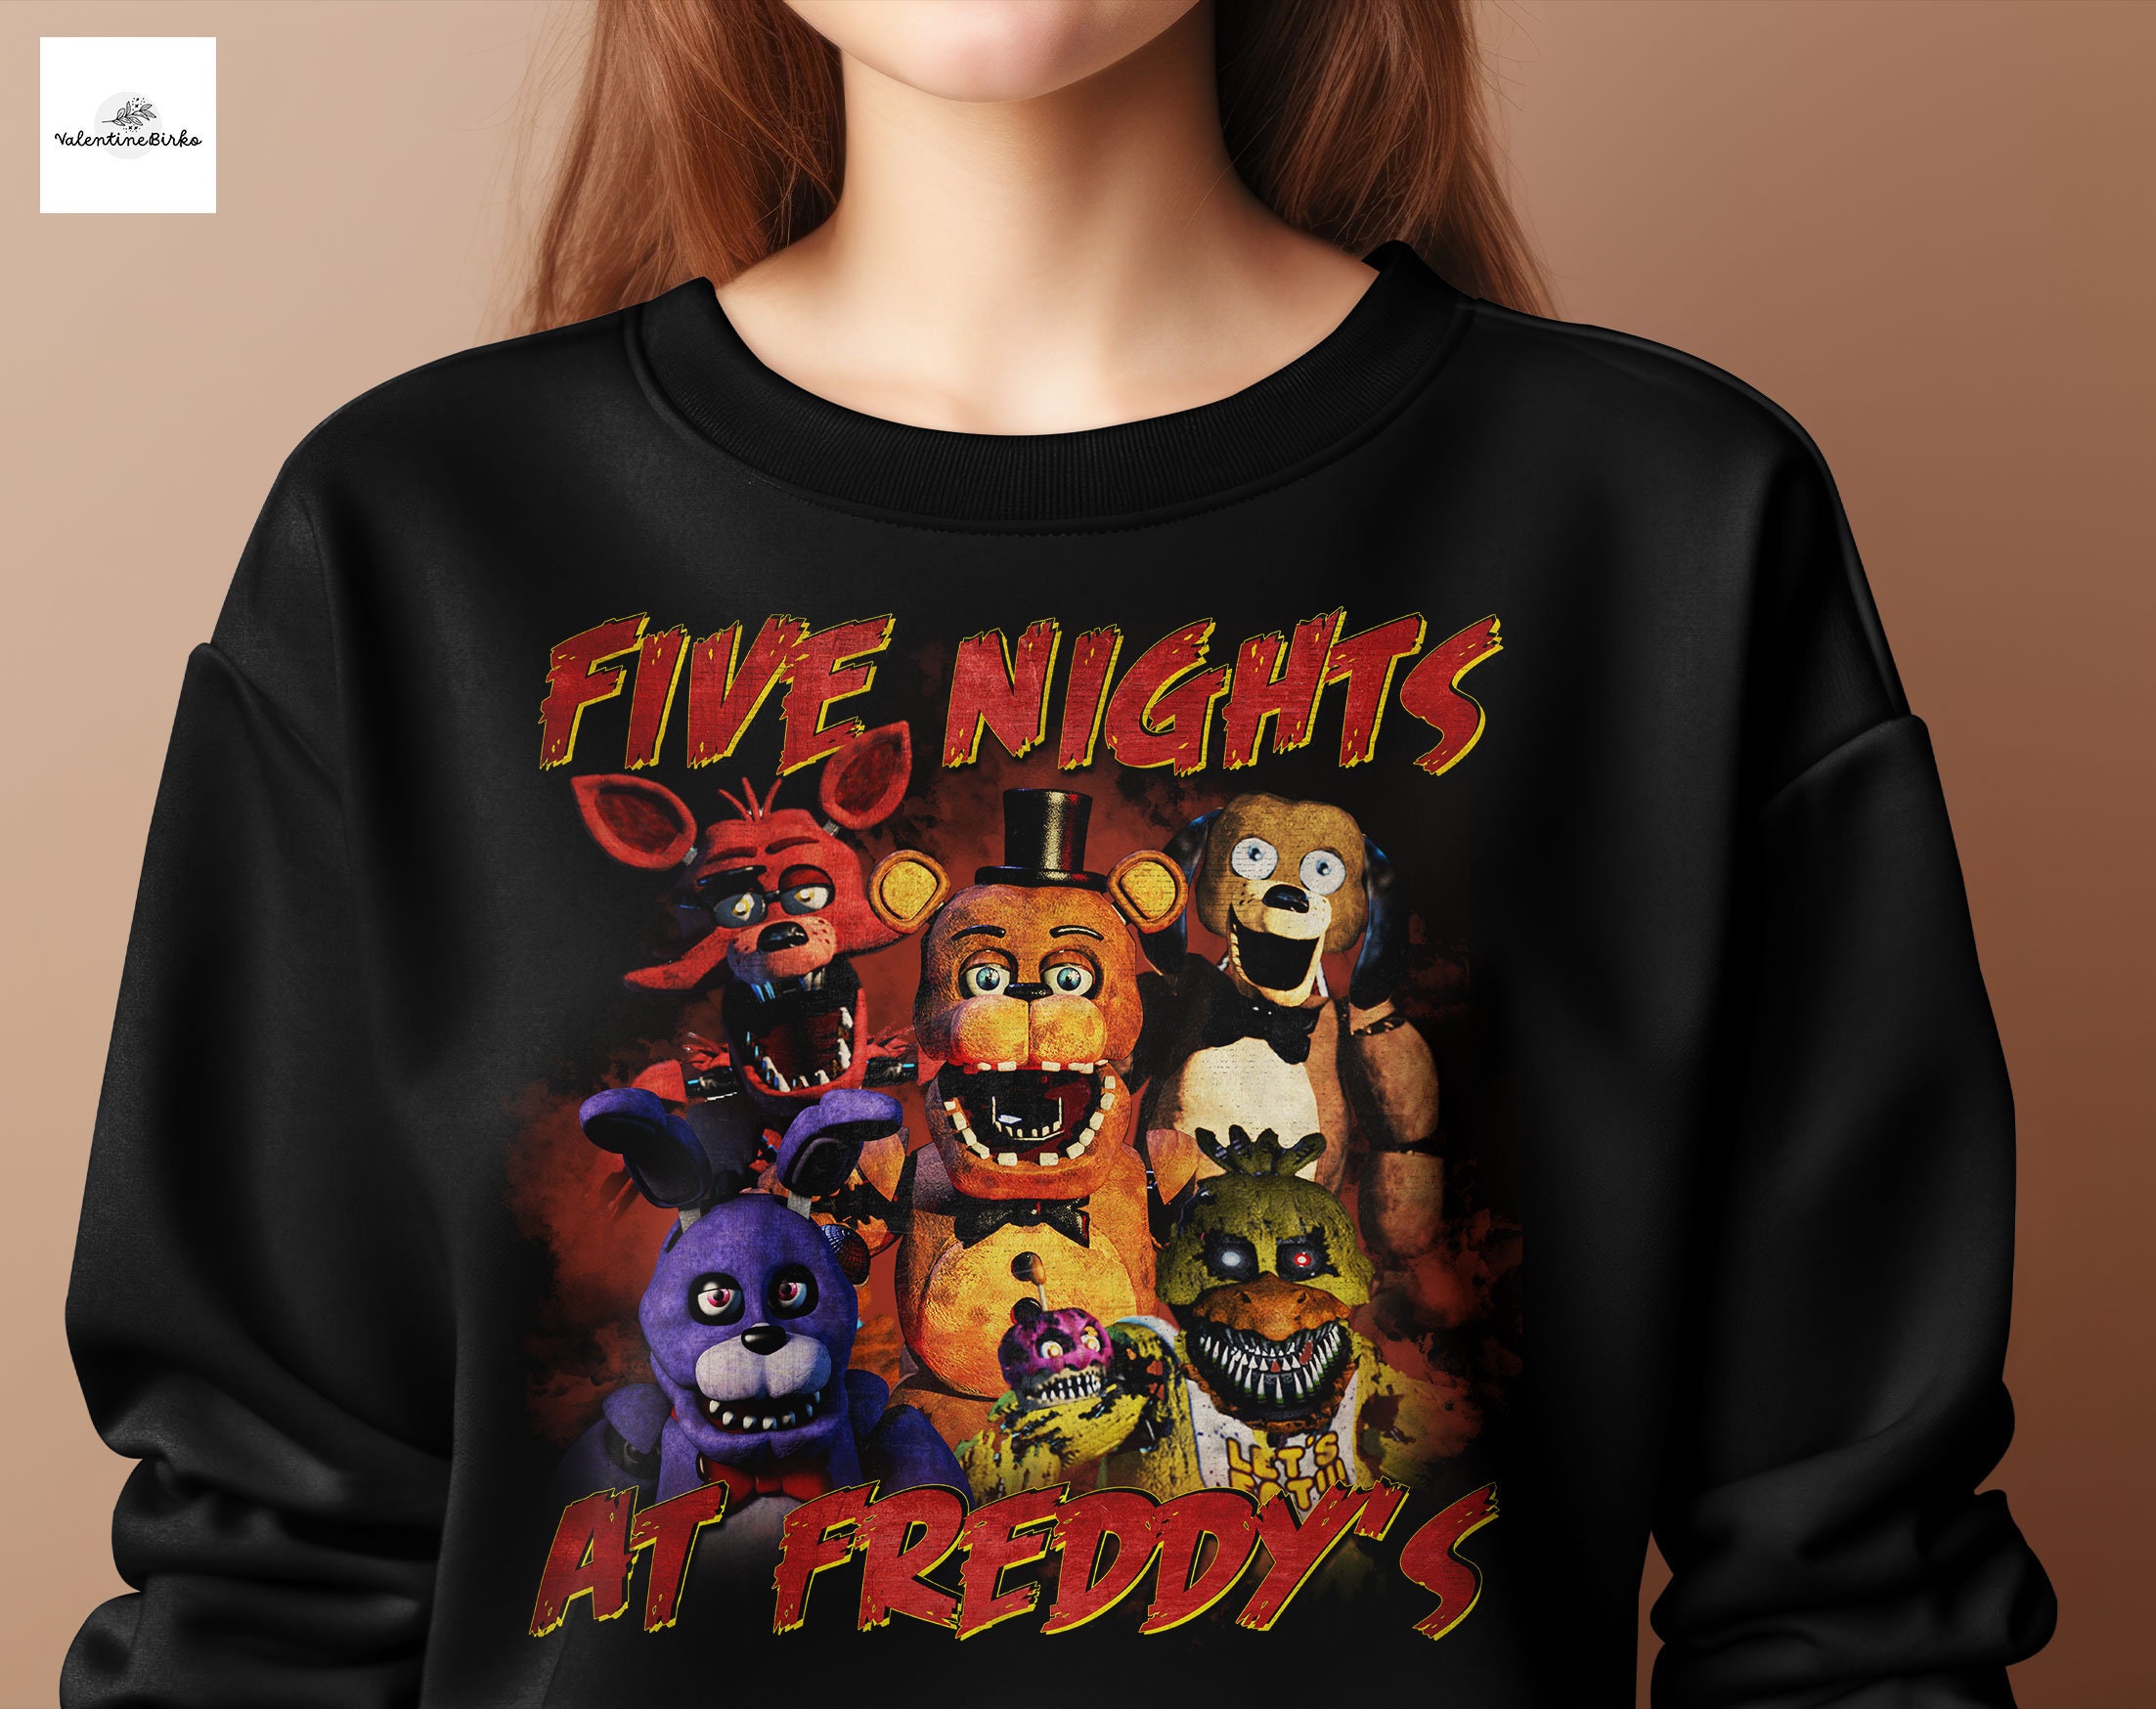 Fnaf Movie, Five Nights at Freddys movie Poster for Sale by McLarenTee